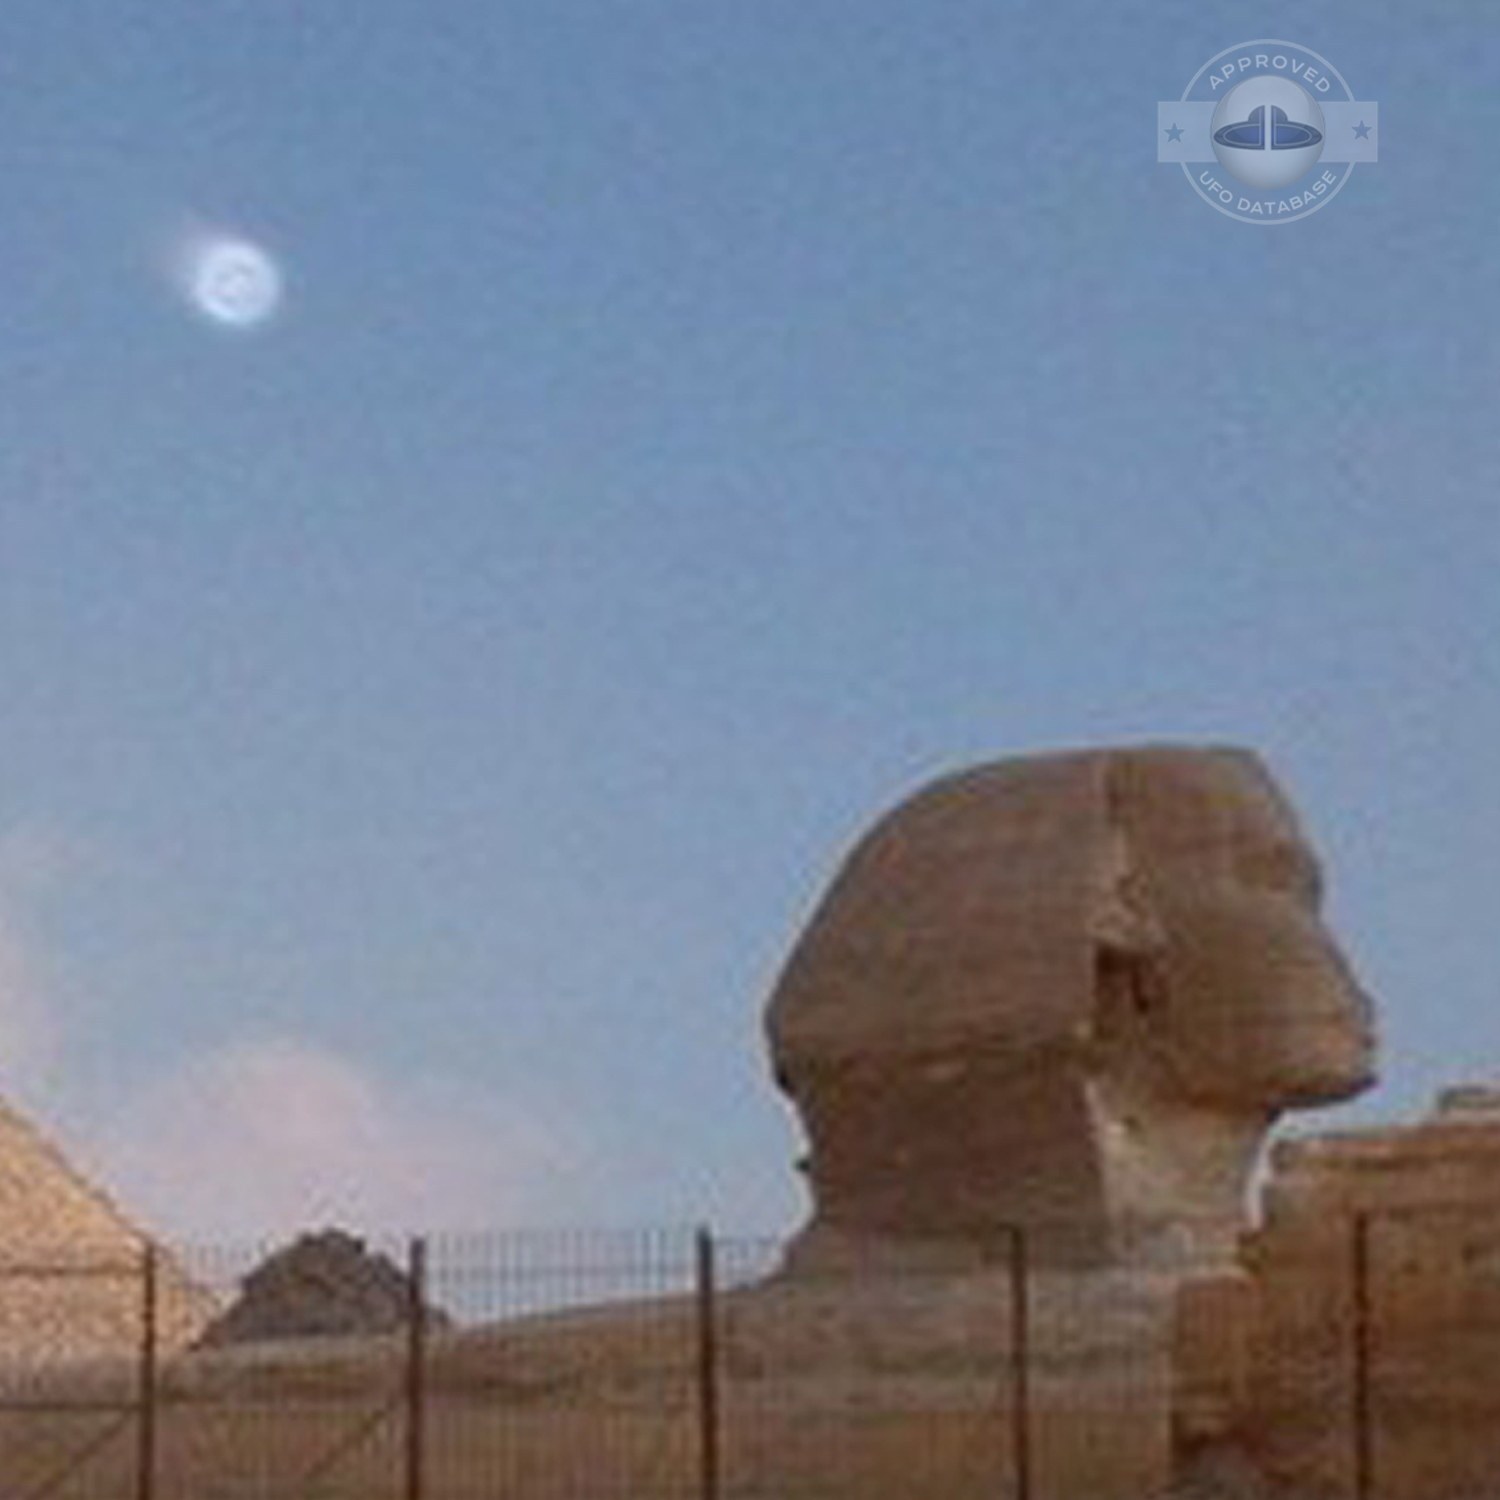 UFO picture near the famous Great Sphinx of Giza by a tourist | Egypt UFO Picture #143-4